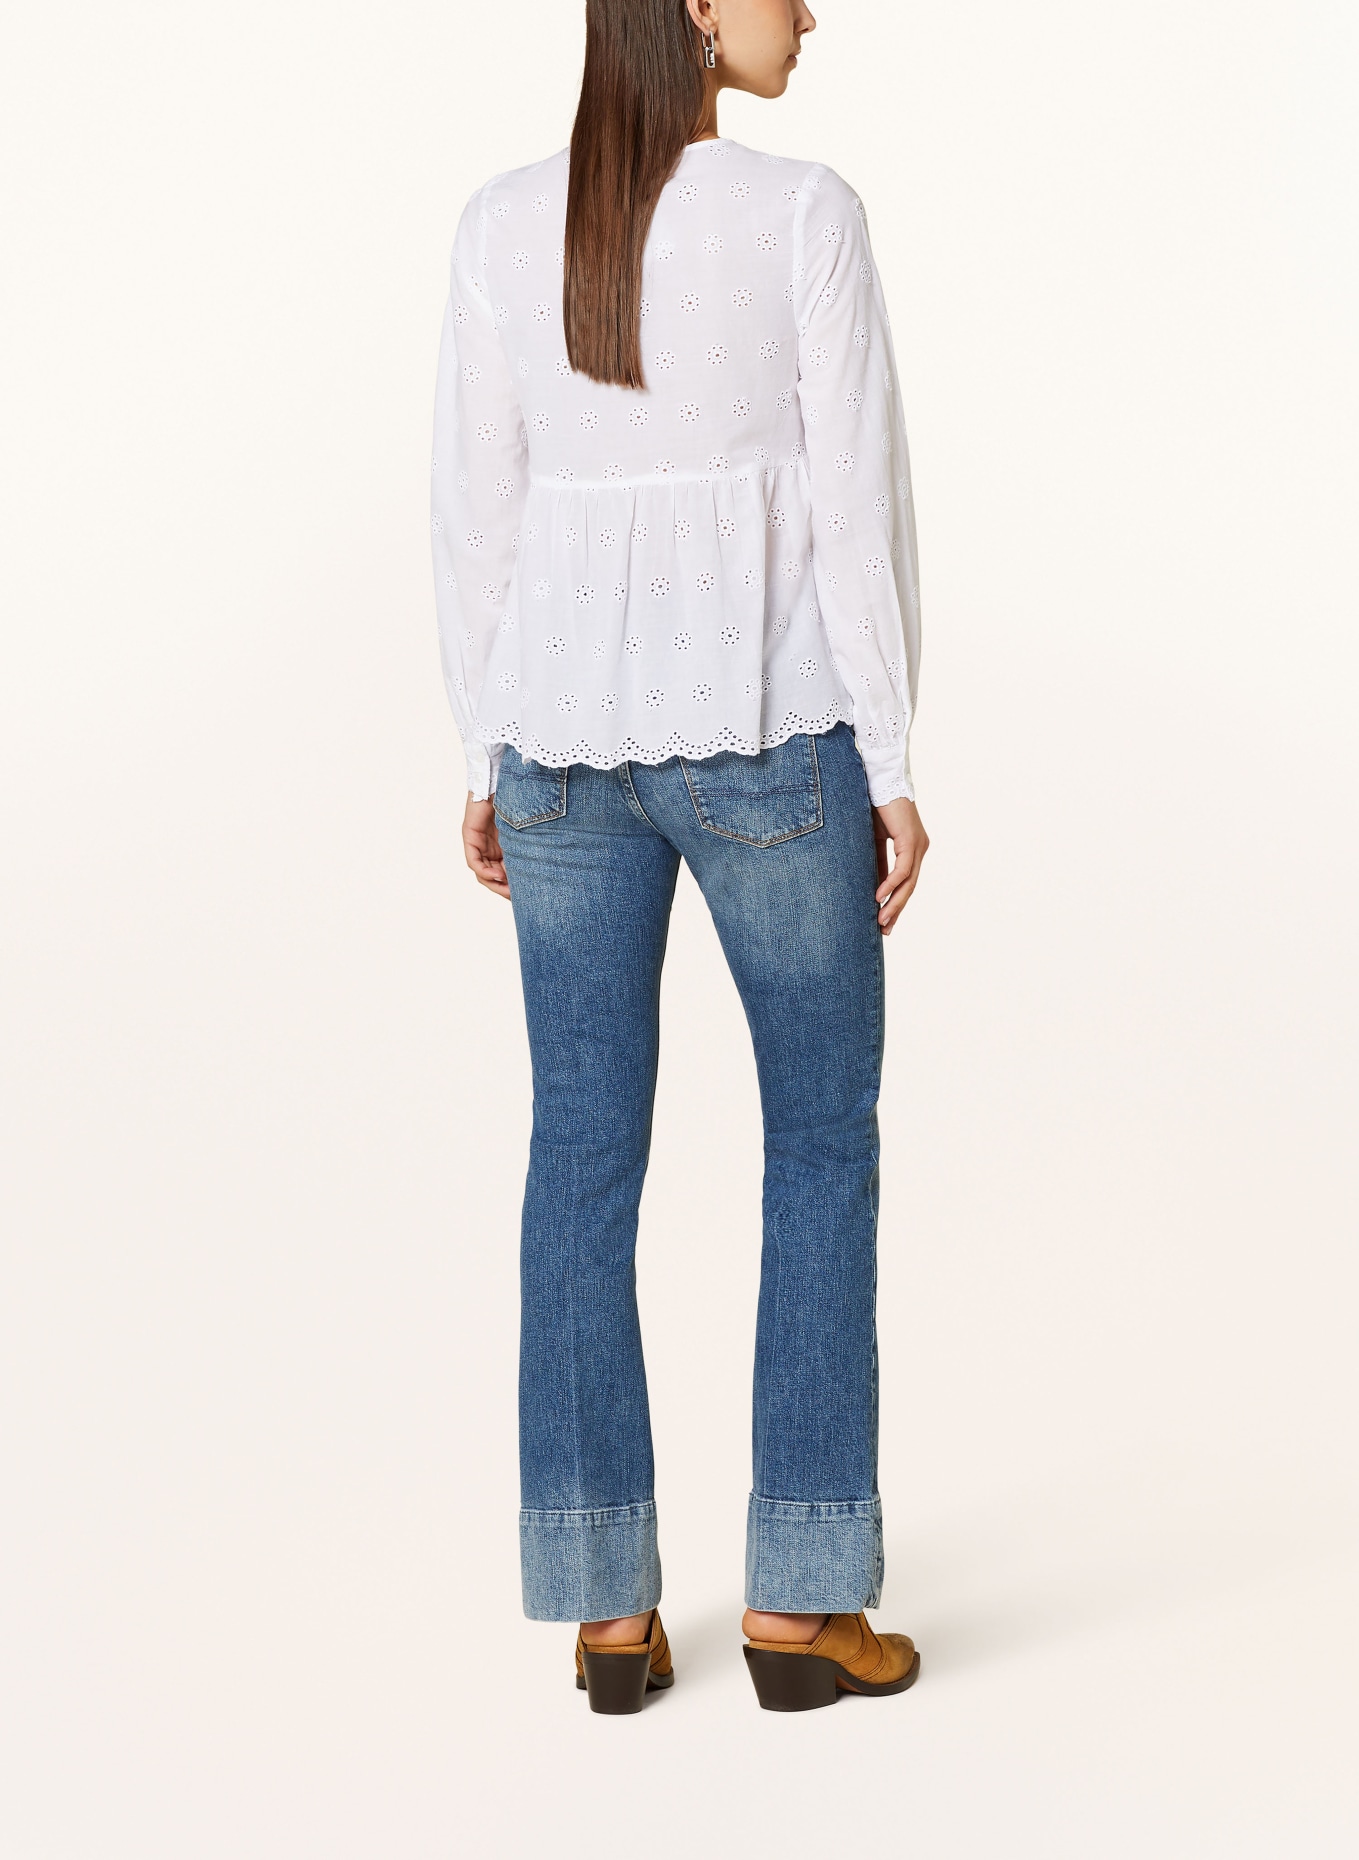 Pepe Jeans Shirt blouse DANAE with broderie anglaise and ruffles, Color: WHITE (Image 3)